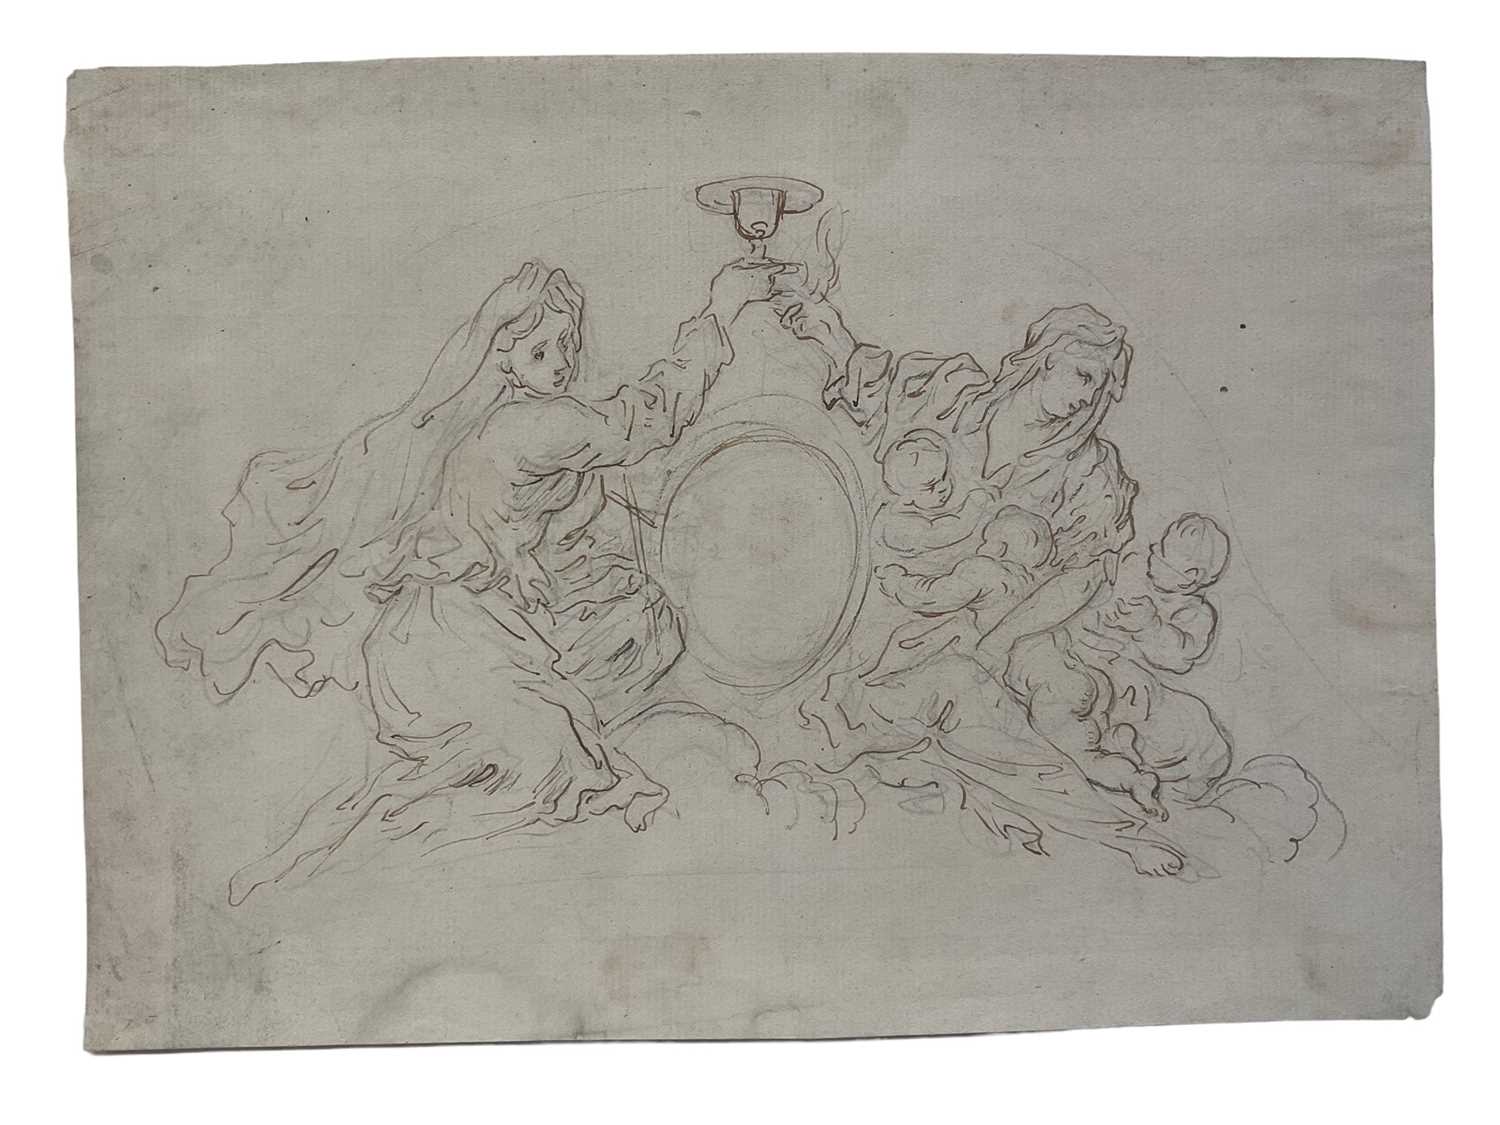 Lot 14 - Continental school, 18th century, pencil, pen and ink, design for a cresting, 15 x 20cm, mounted but unframed